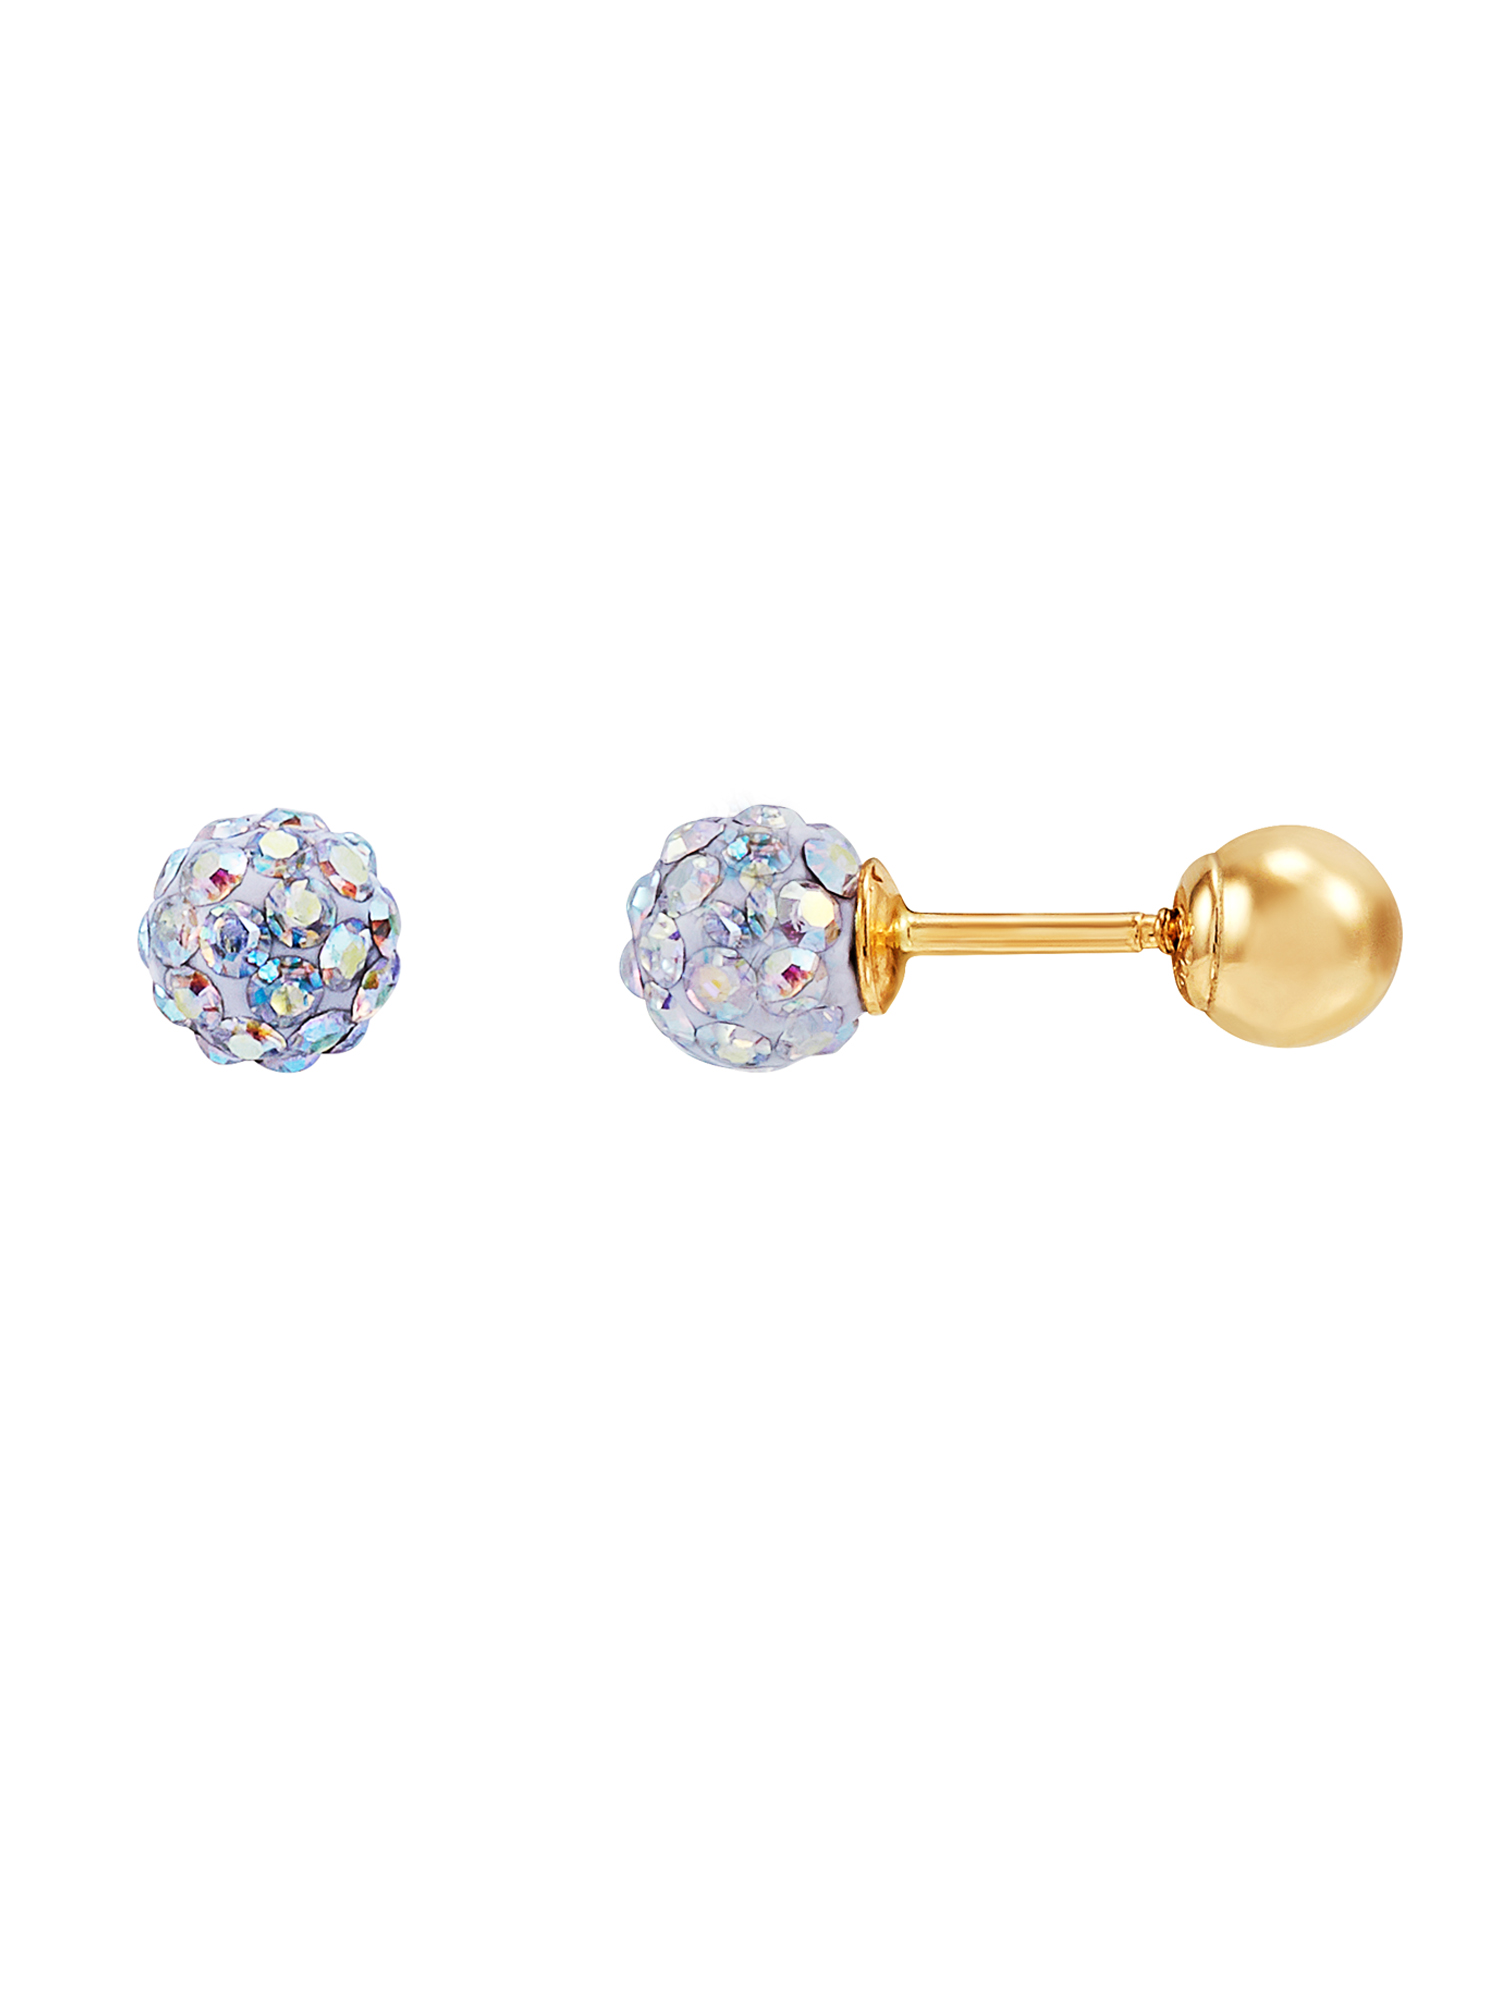 Brilliance Fine Jewelry Girls Aurora Borealis Crystals 4.8MM Ball Studs in 10K Yellow Gold - image 2 of 4